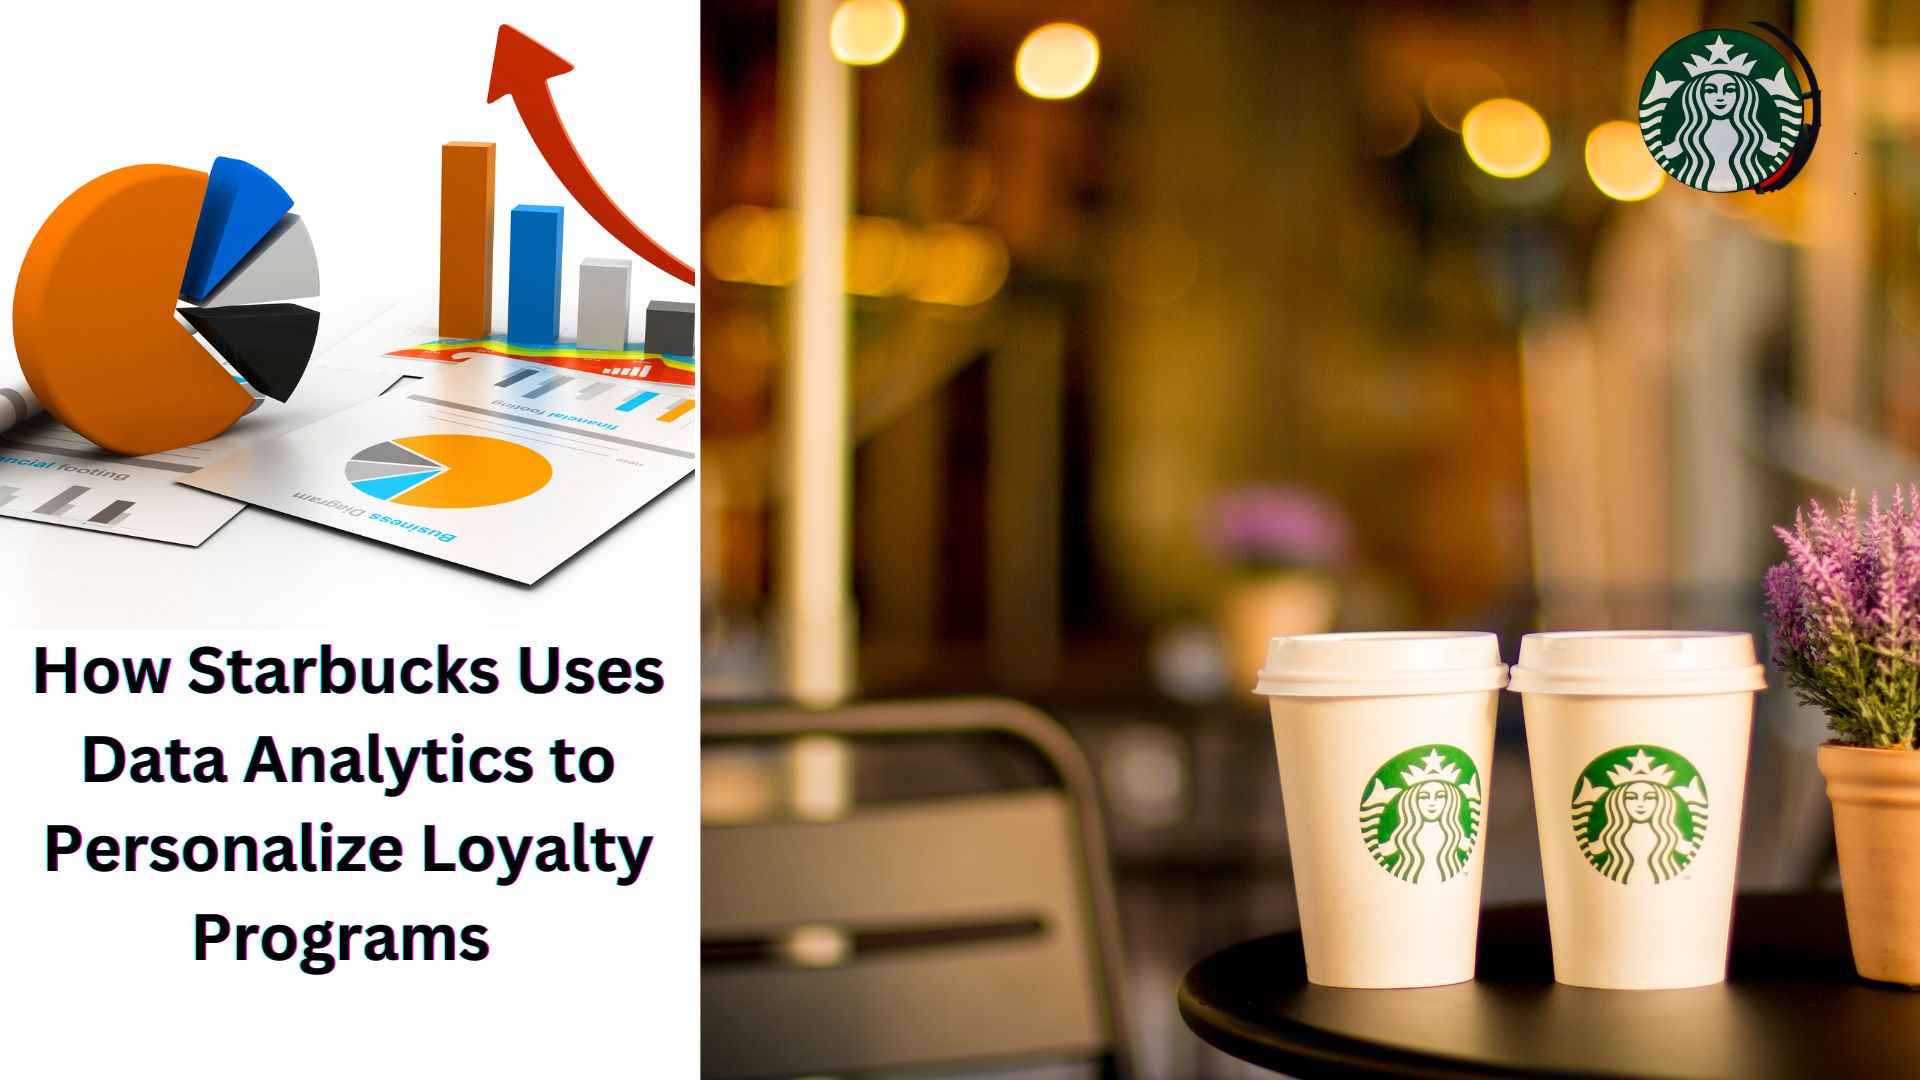 How Starbucks Uses Data Analytics to Personalize Loyalty Programs